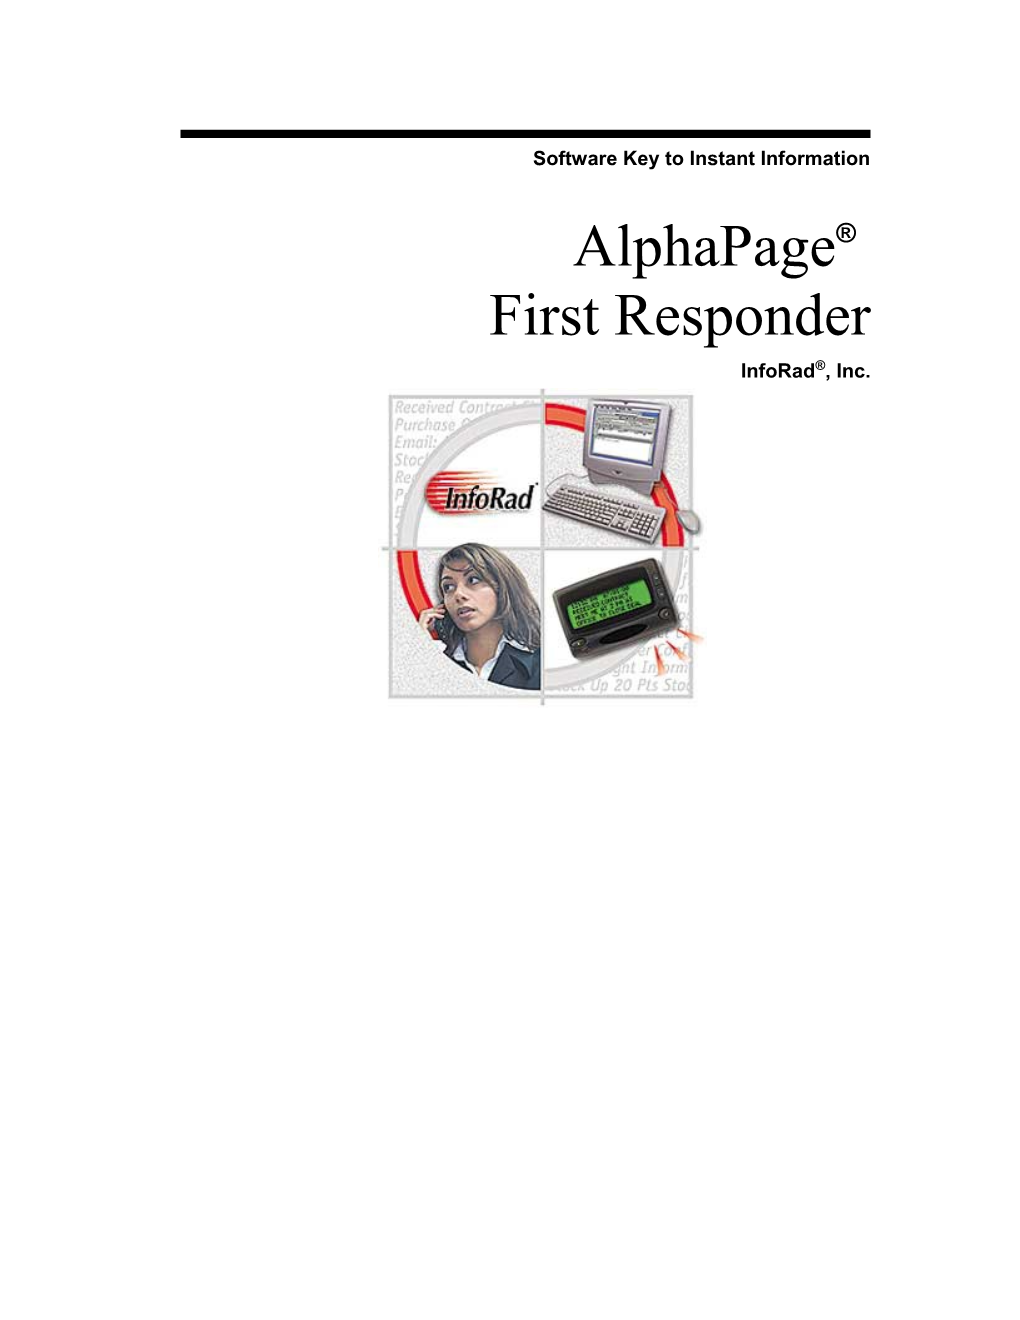 Alphapage First Responder Users Manual